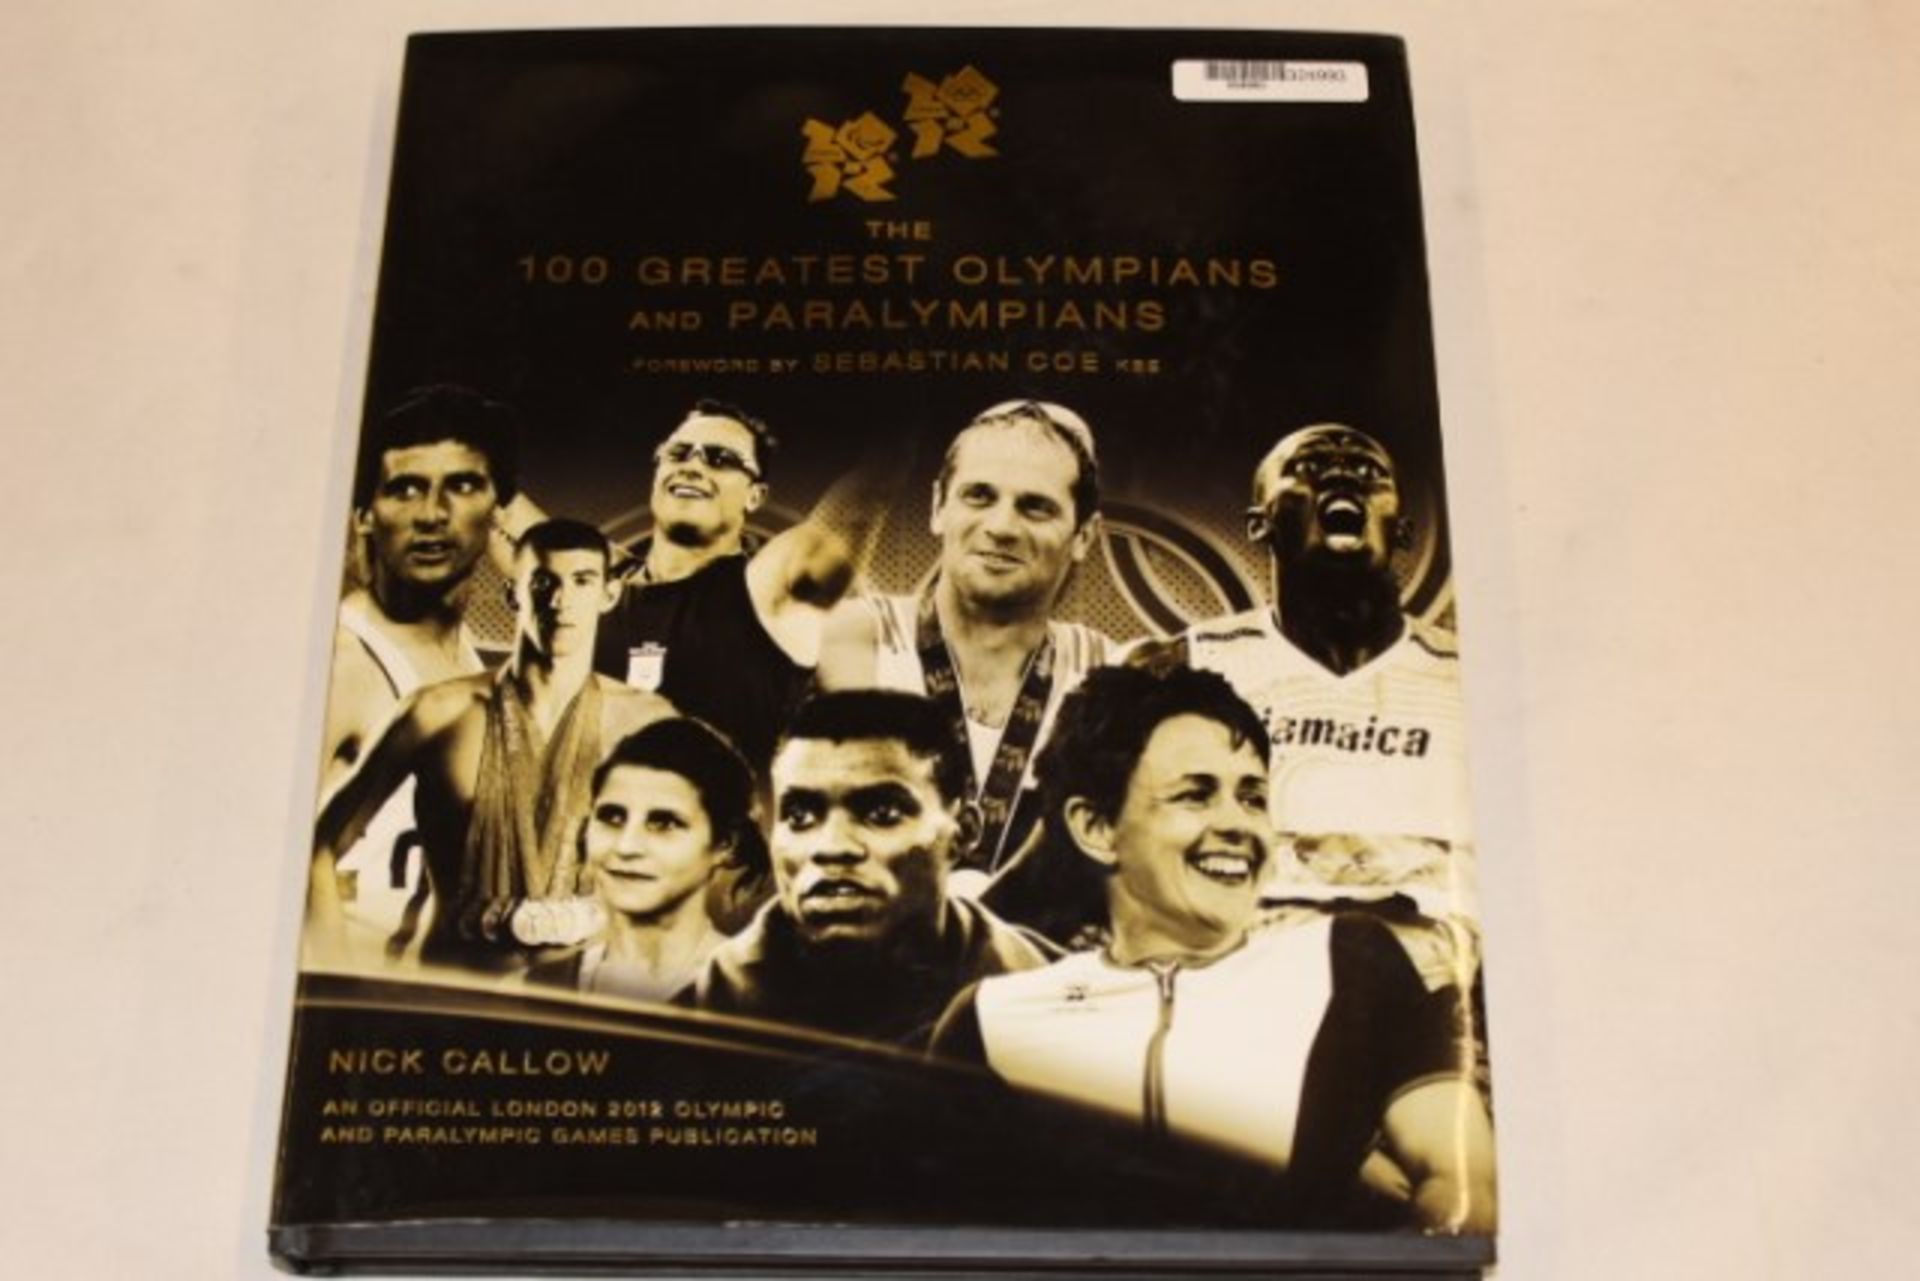 100 Greatest Olympians + Paralympians Book By Nick Callow RP £25.00